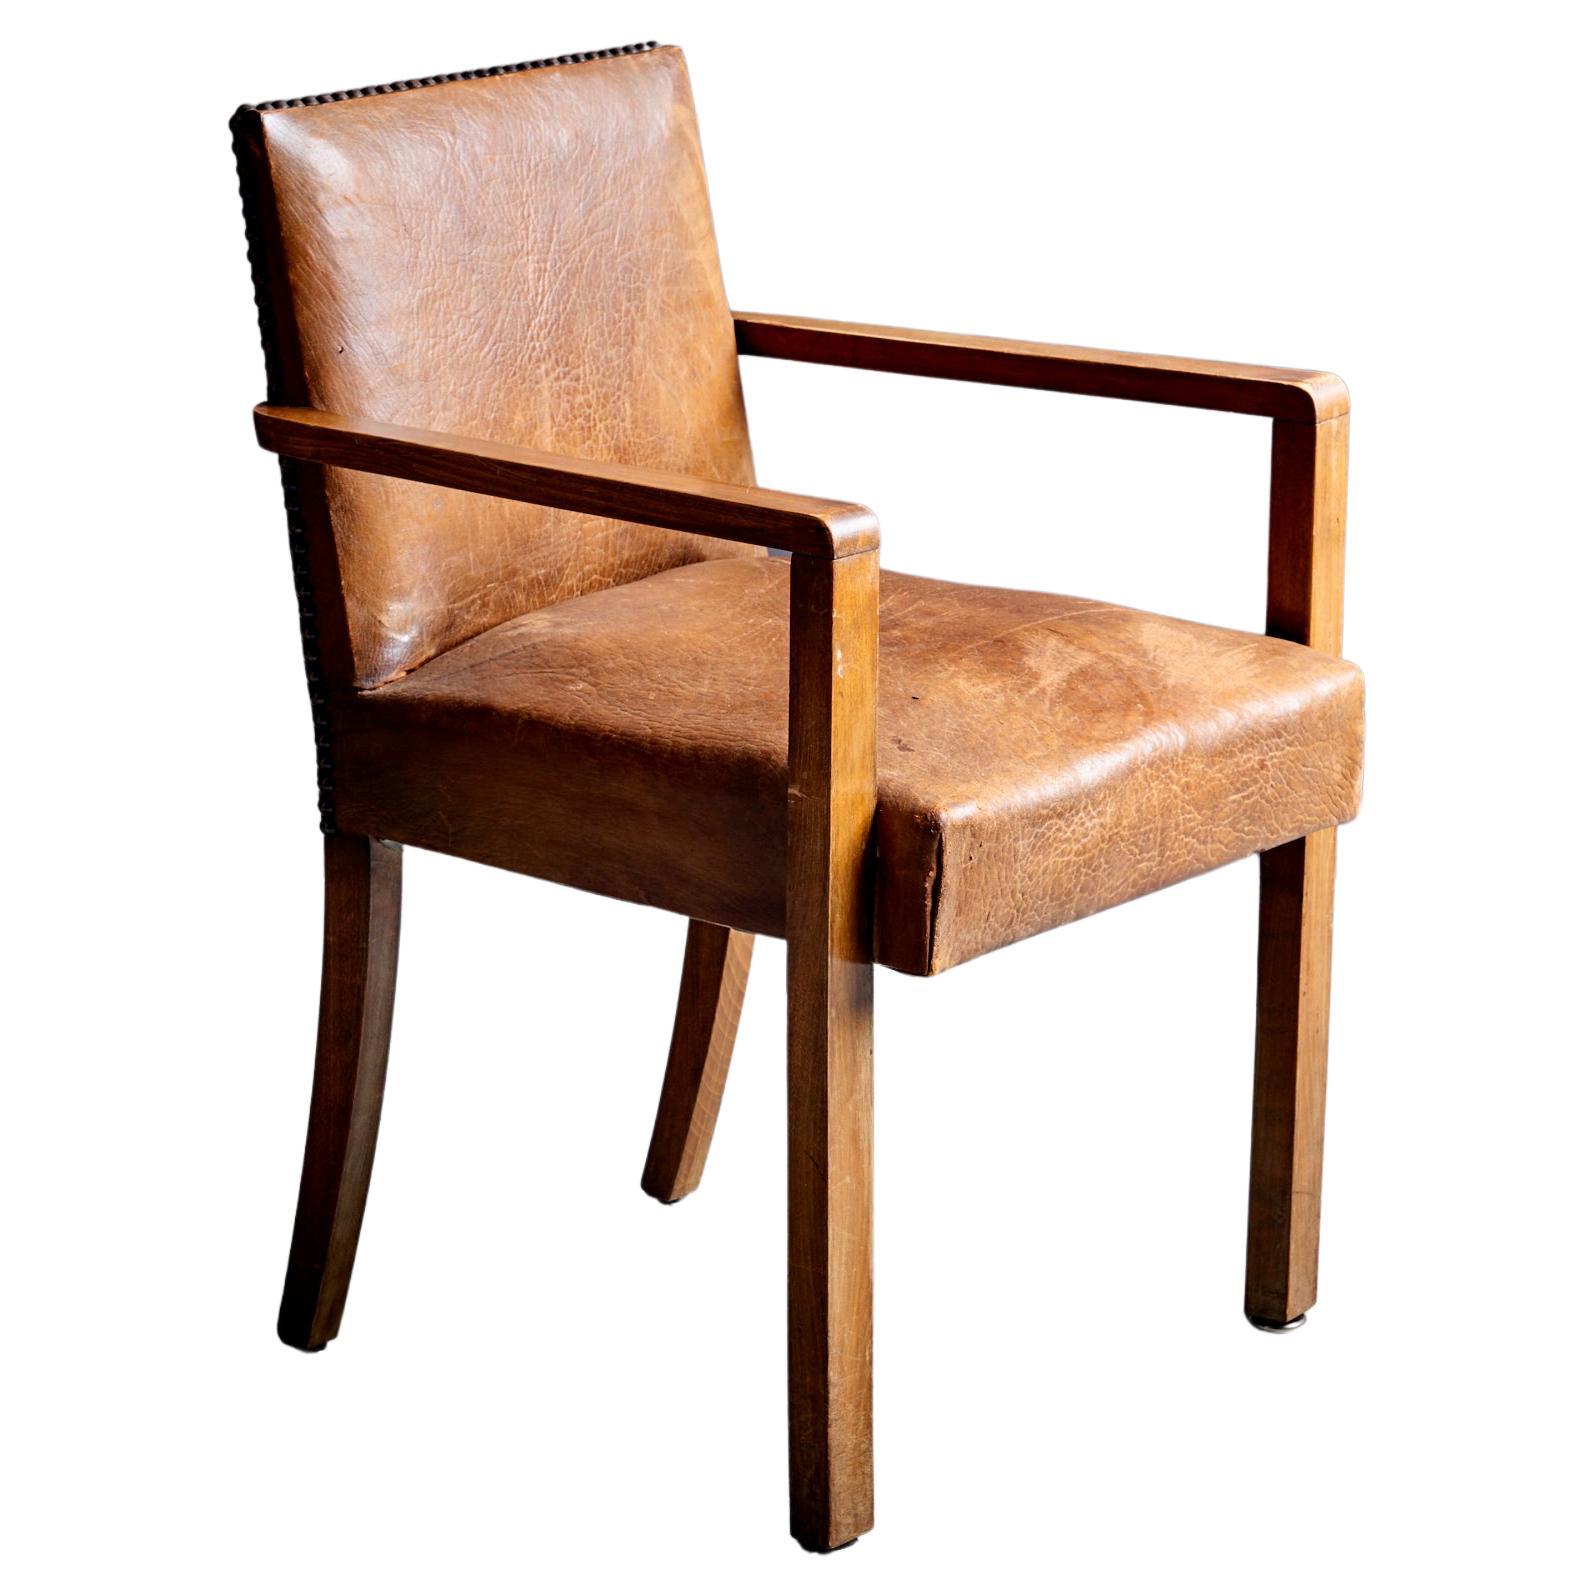 Art Deco Arm Chair attributed to Francis Jourdain 1940s brown leather For Sale